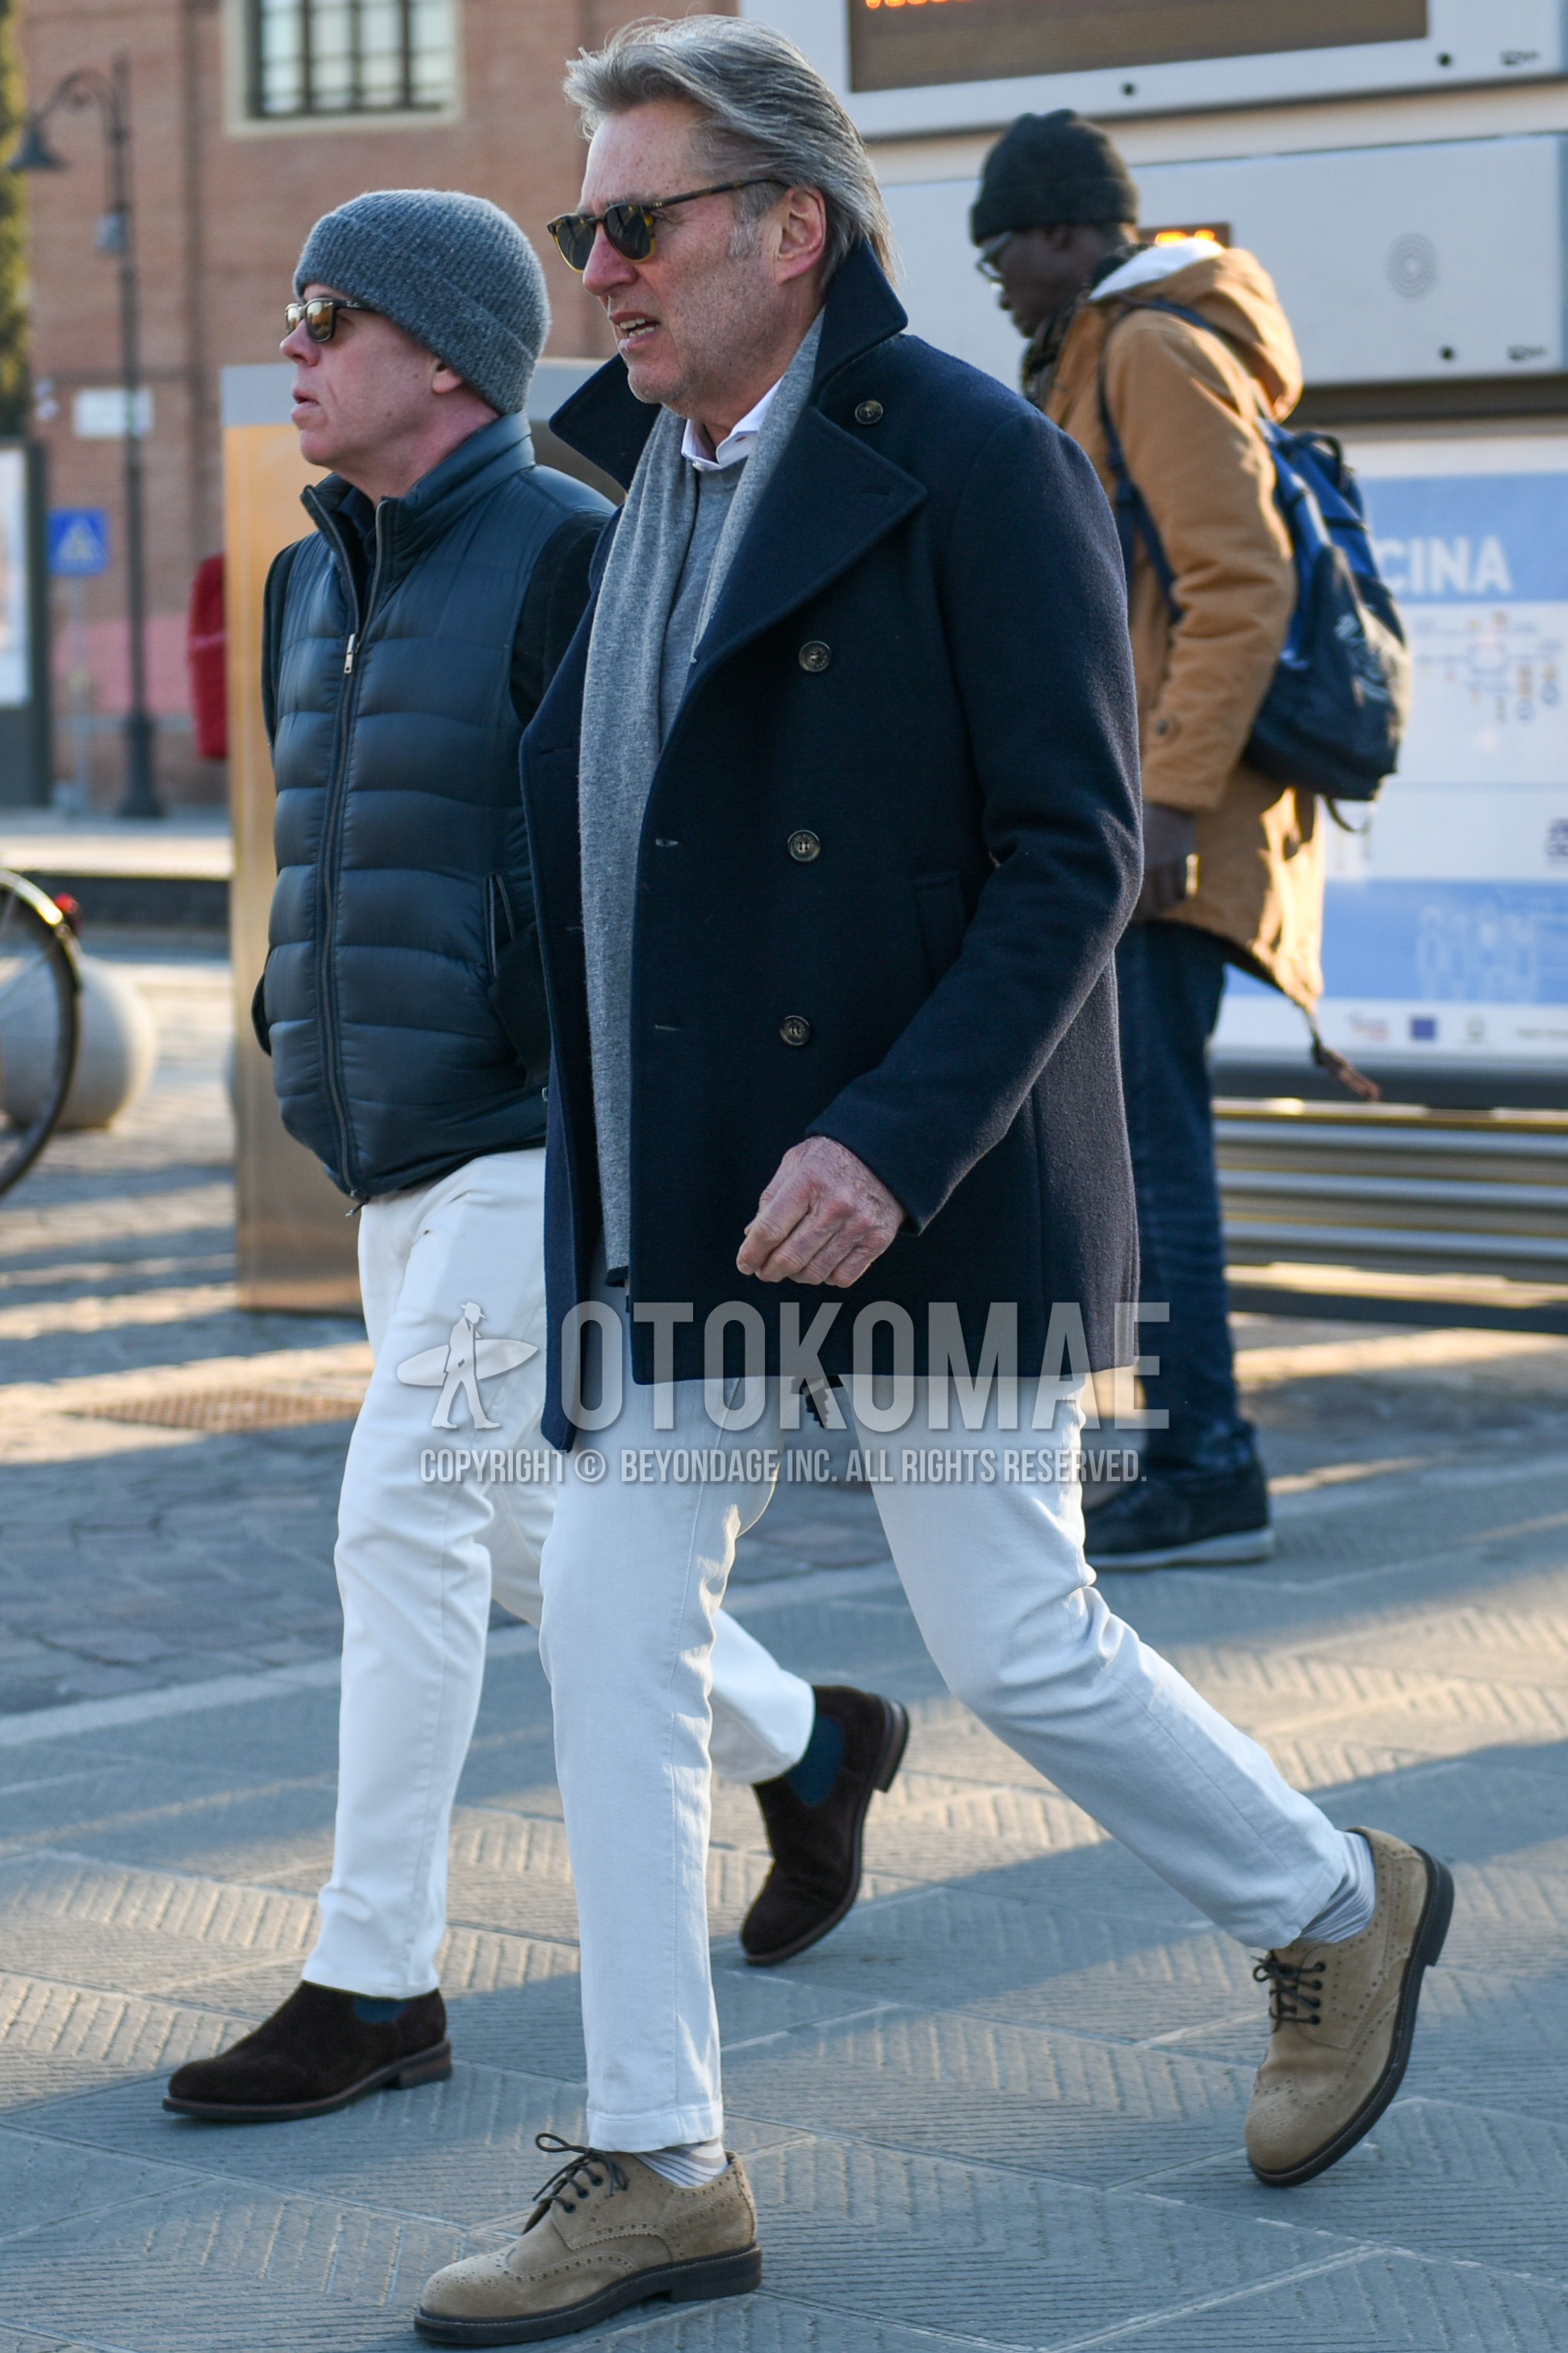 Men's autumn winter outfit with brown tortoiseshell sunglasses, gray plain scarf, navy plain p coat, gray plain sweater, white plain shirt, white plain cotton pants, white plain ankle pants, white horizontal stripes socks, beige wing-tip shoes leather shoes.